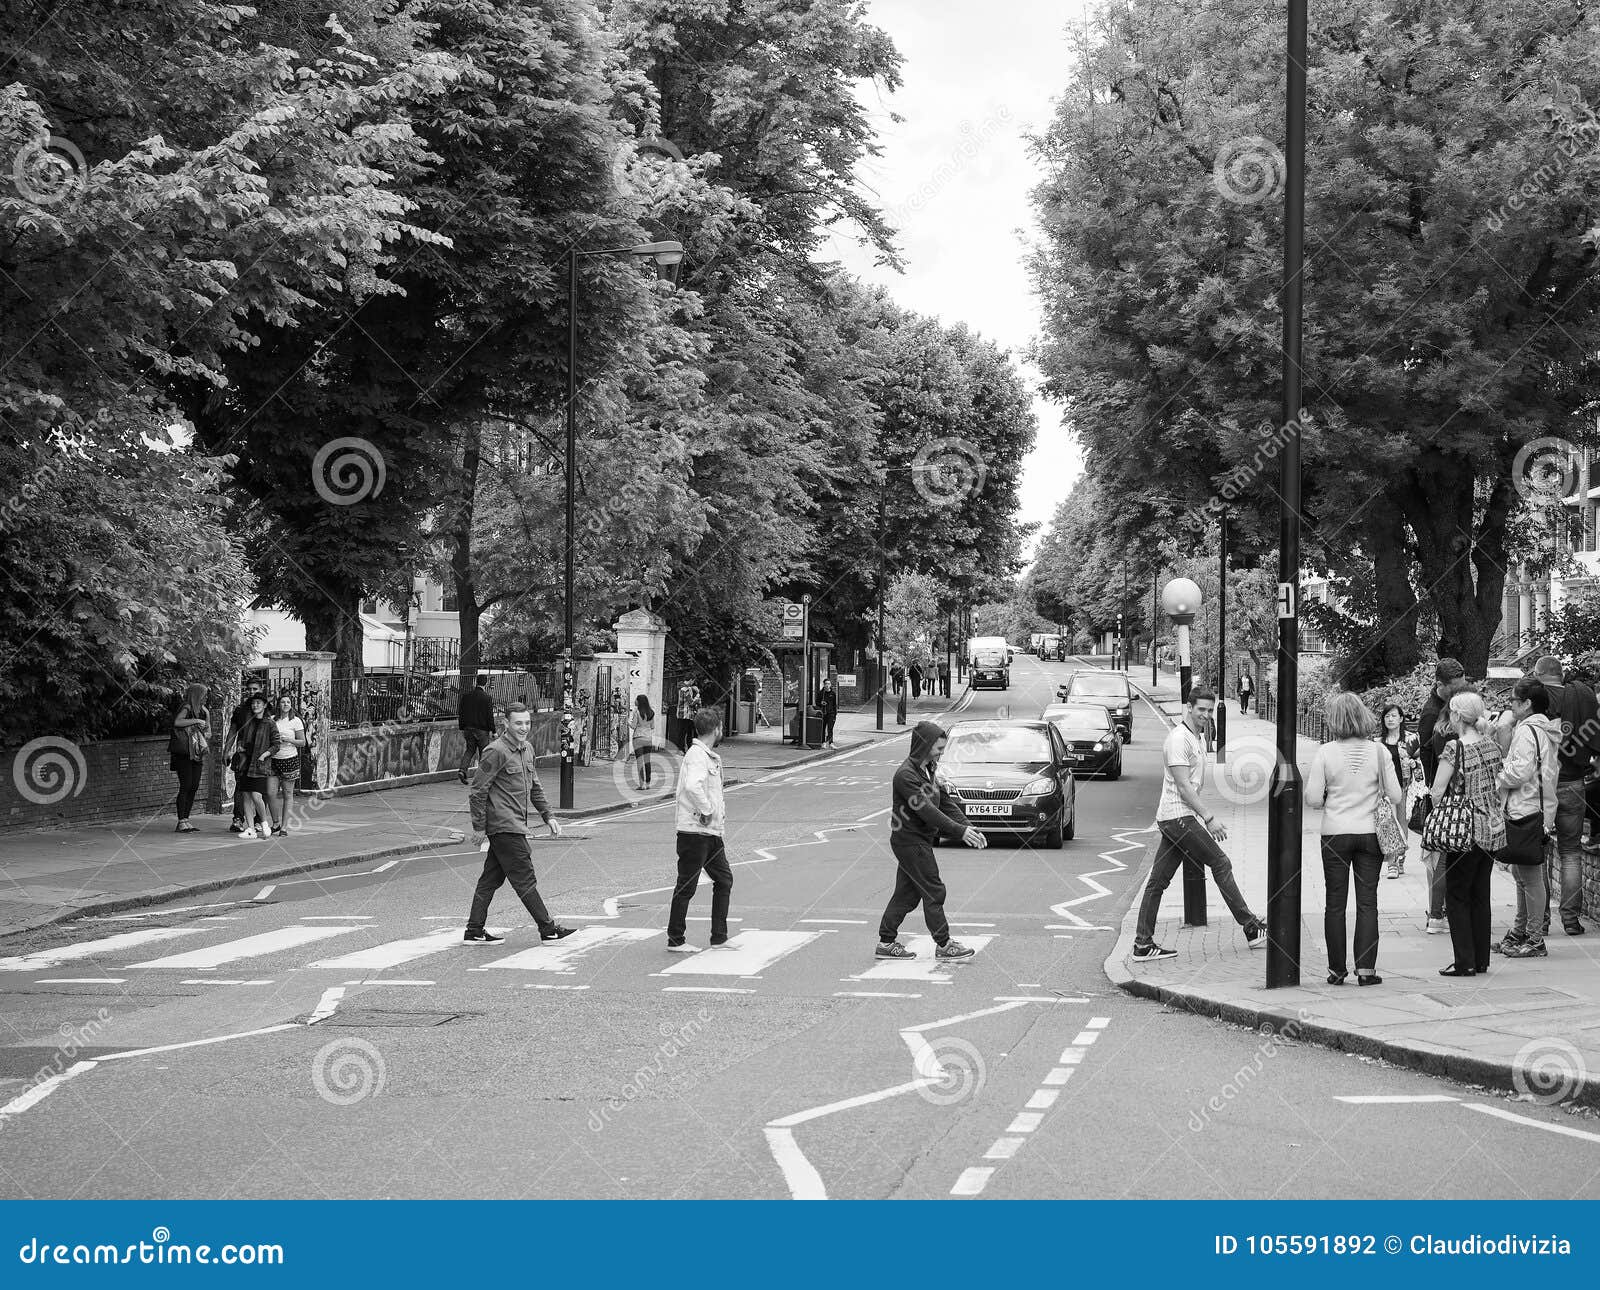 Abbey Road Crossing in London Black and White Editorial Photography ...